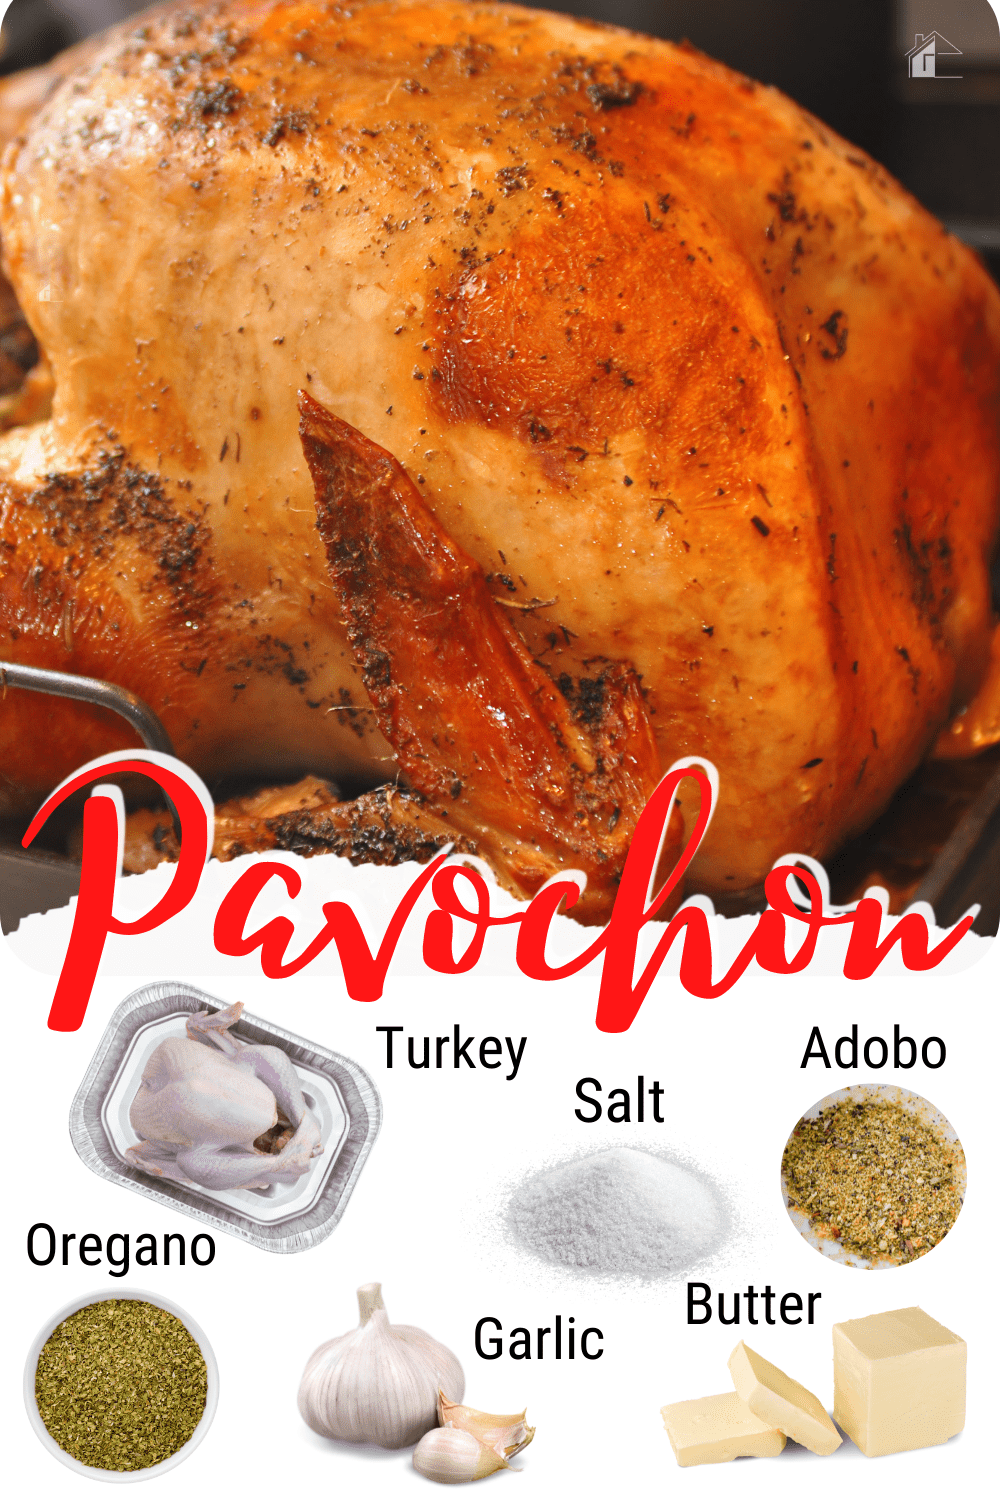 Learn how to create this Puerto Rican Thanksgiving dish, Pavochon. Turkey seasoned with lots of garlic, oregano, and – of course - adobo. via @mystayathome